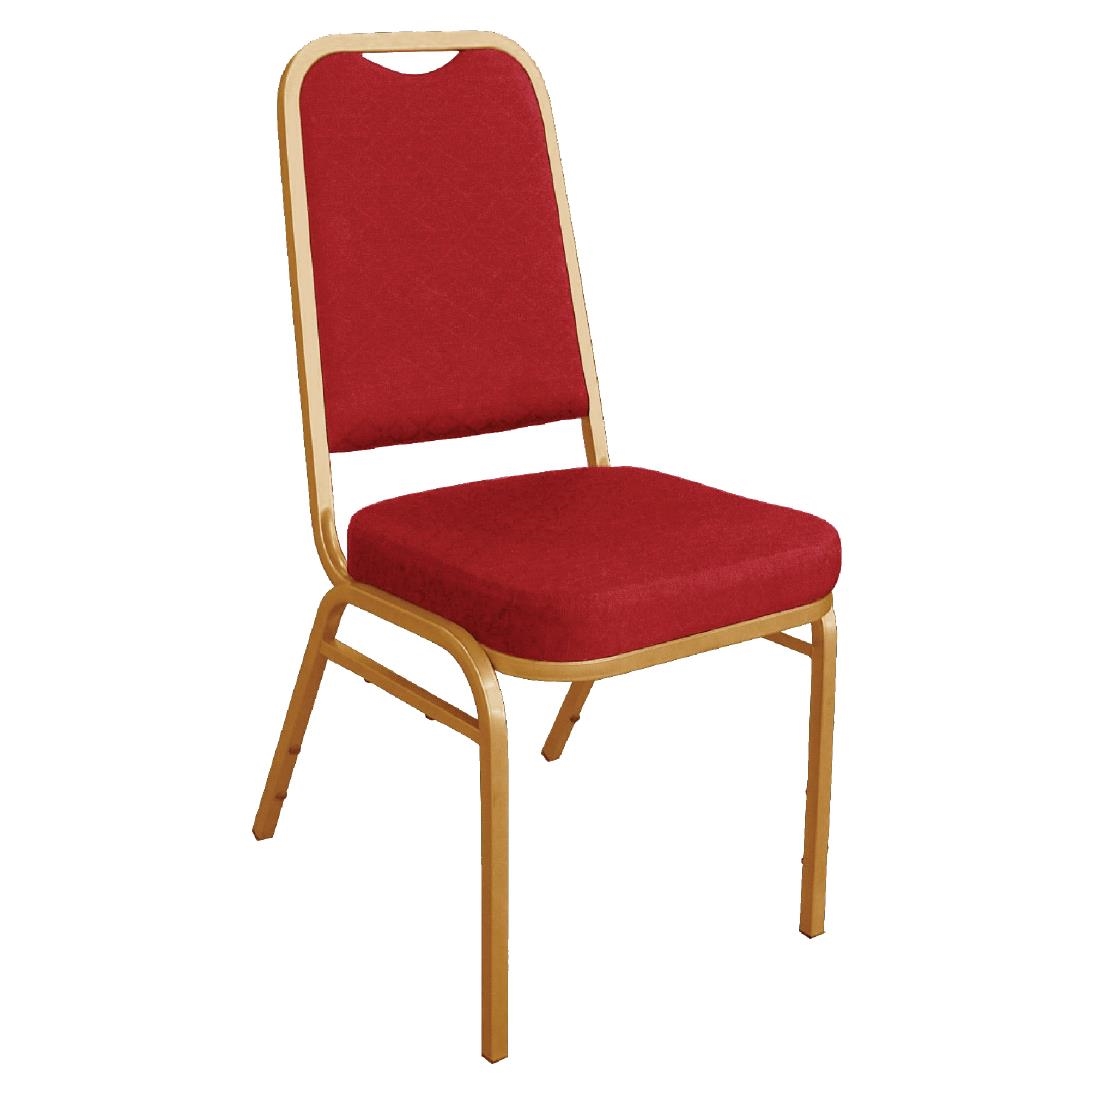 Square Banqueting Chair - Red